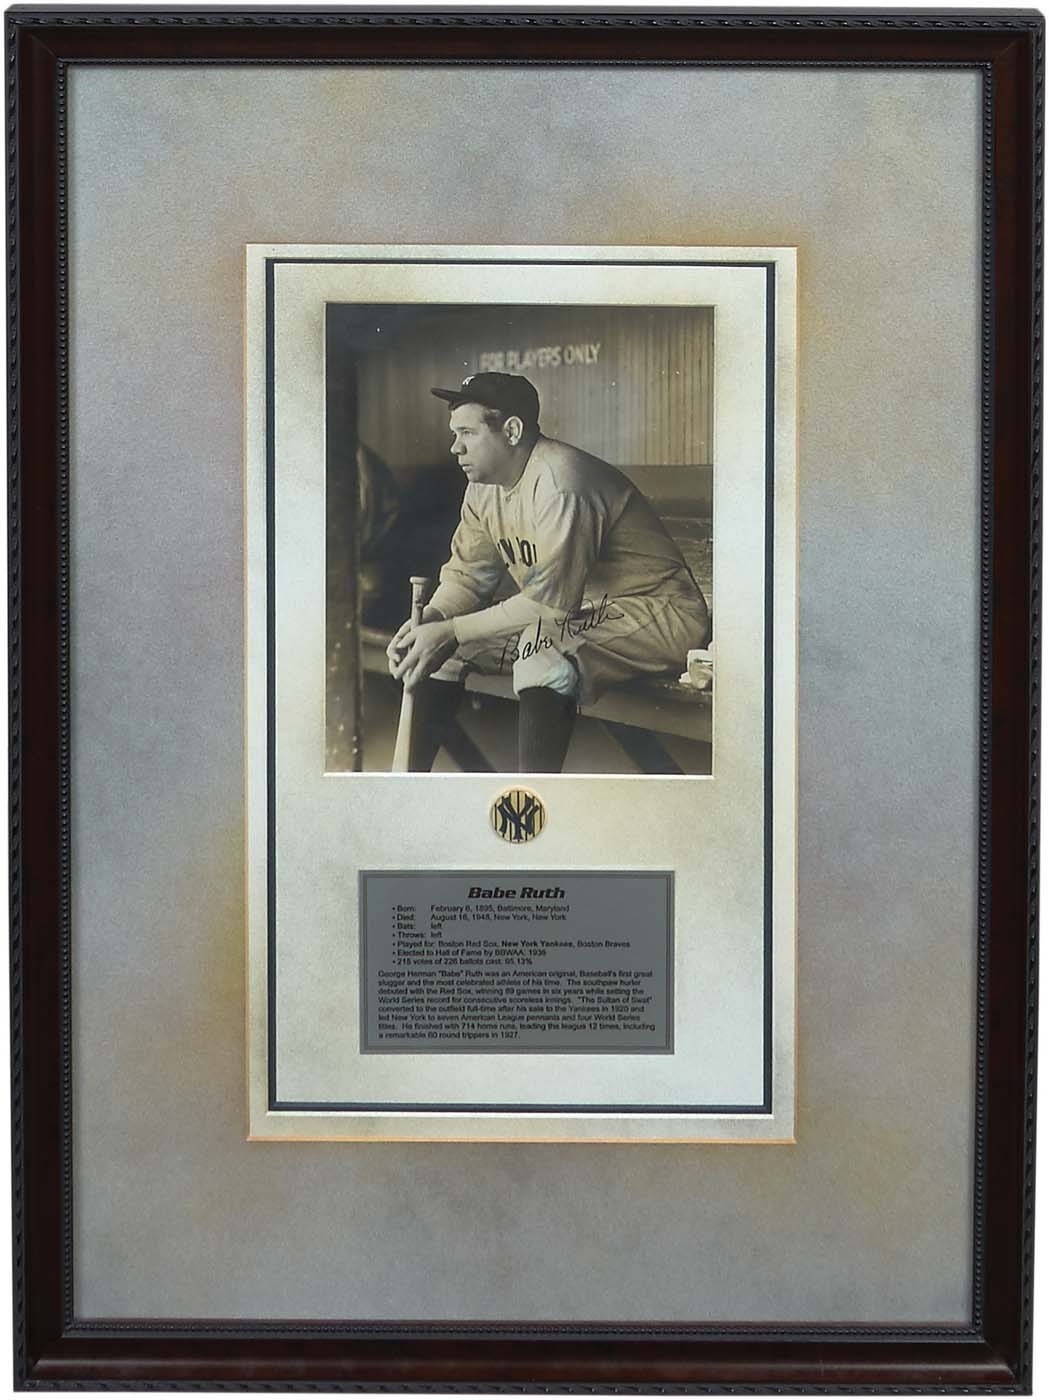 - Babe Ruth Signed Photograph Display (PSA MINT 9)